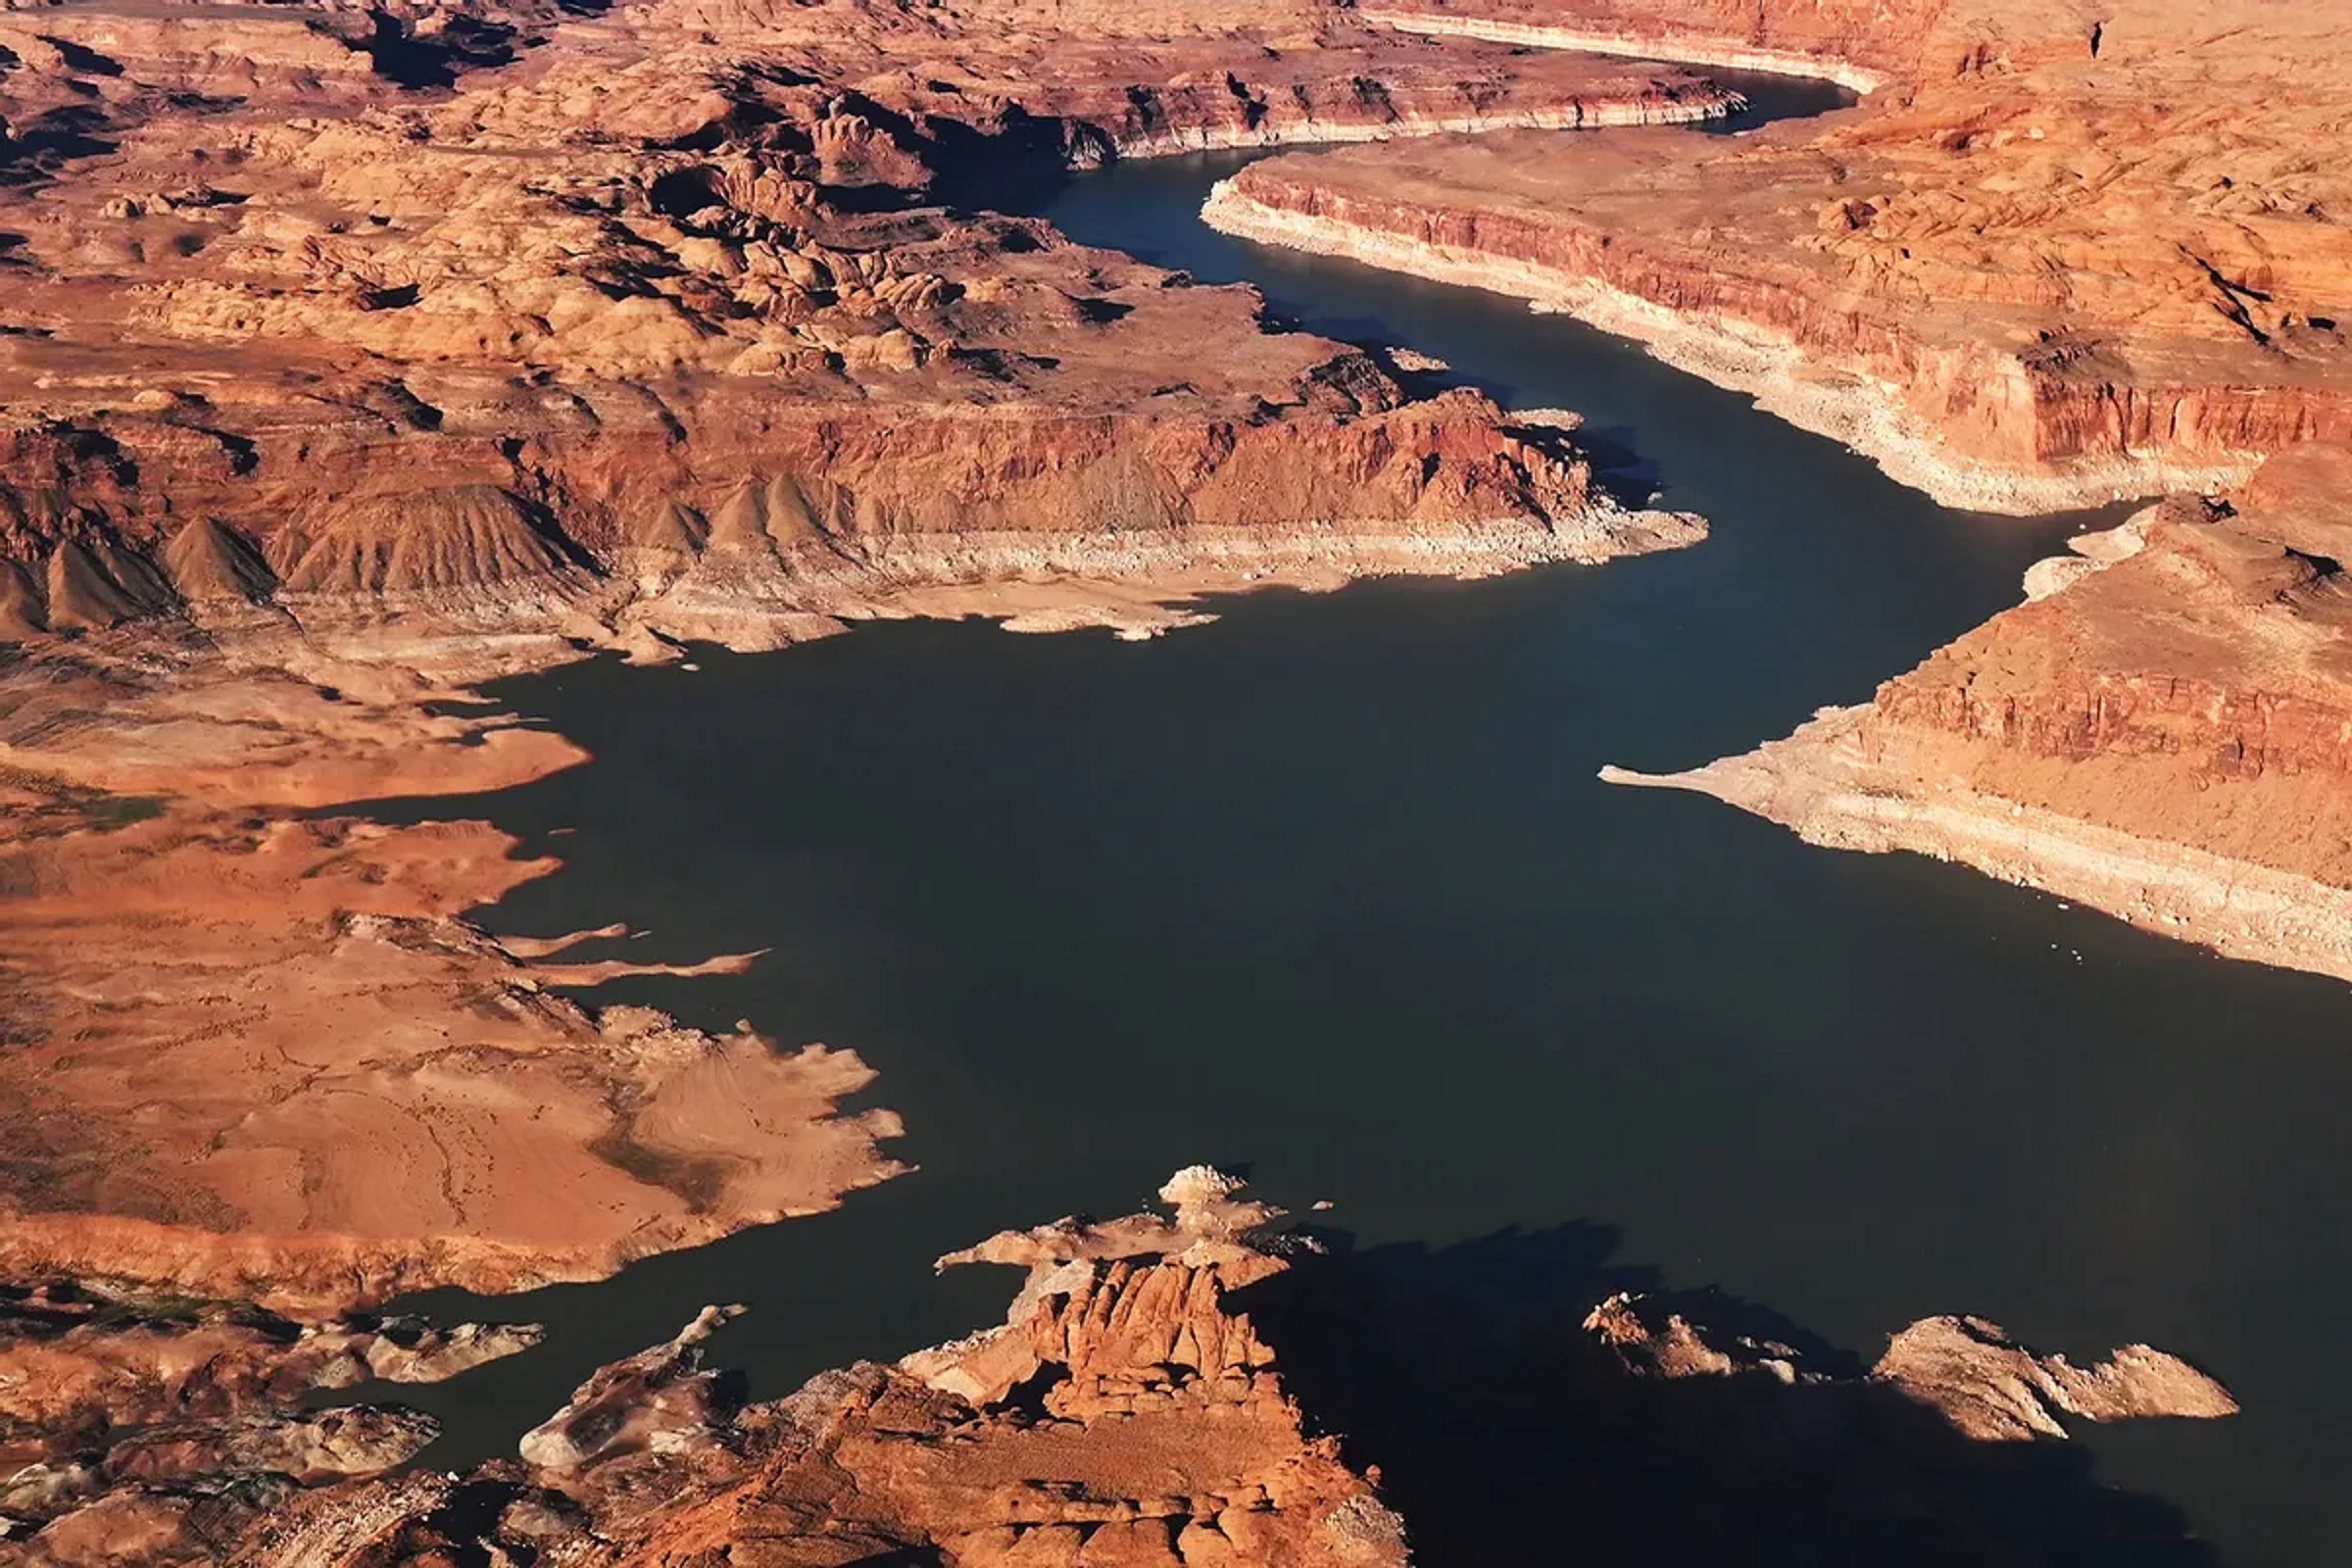 Aerial view of Lake Powell in Page, Arizona on 5 April 2022, showing water levels at a historic low. Photo: RJ Sangosti / MediaNews Group / The Denver Post / Getty Images